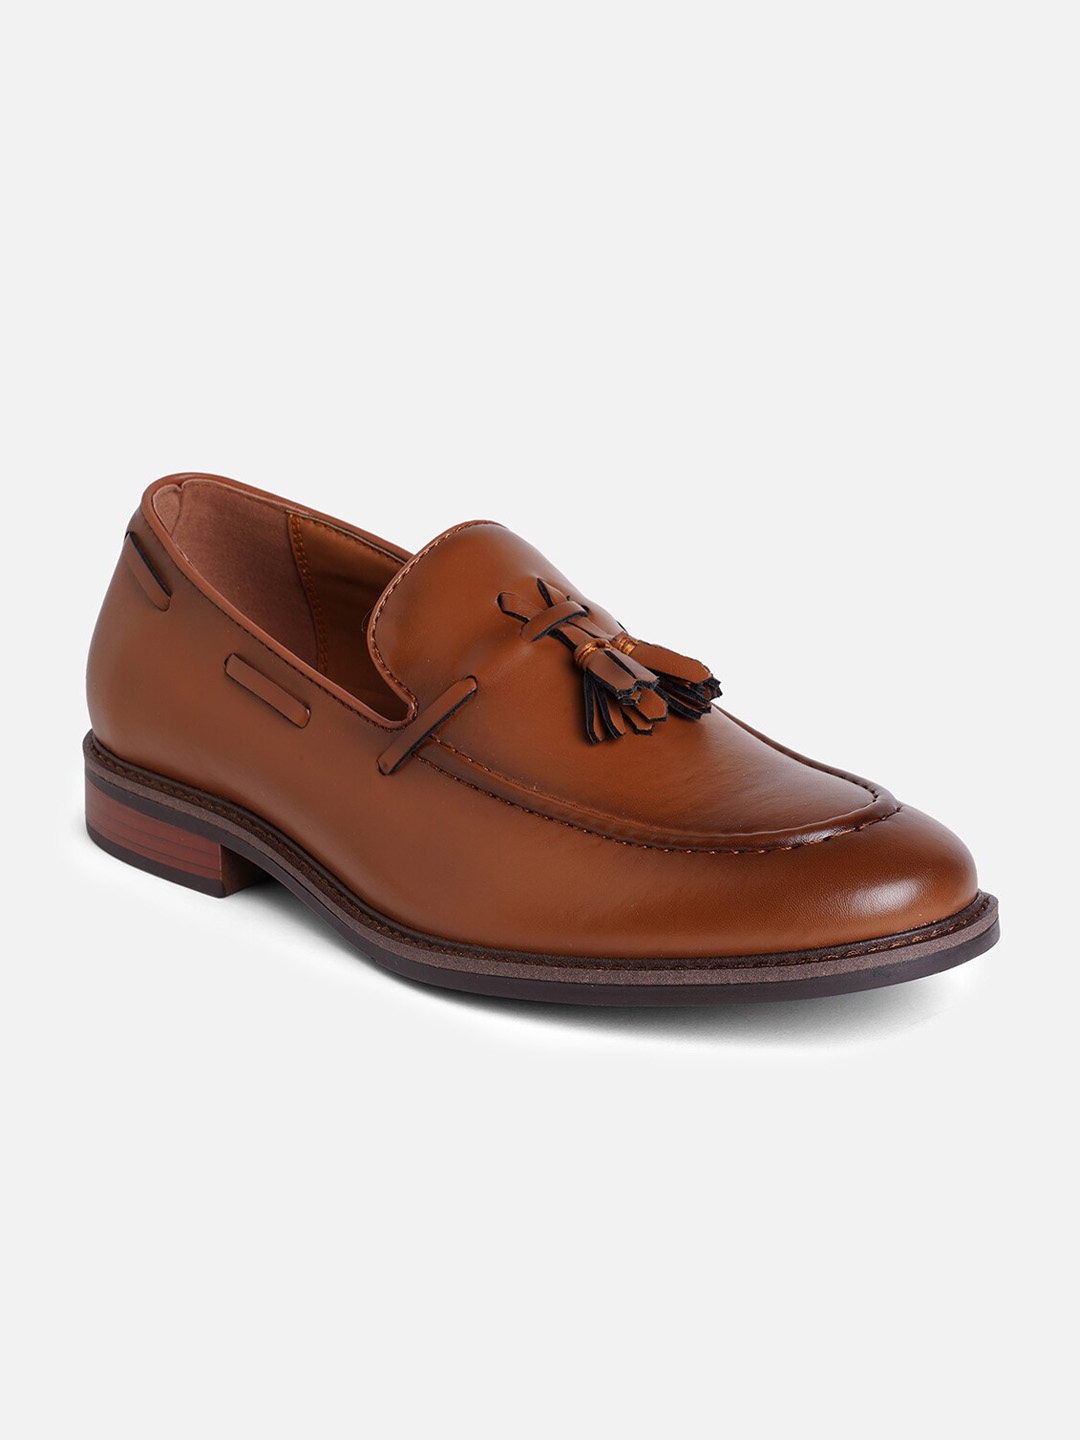 Buy online Maroon Leather Slip On Ons from Formal Shoes for Men by Louis  Stitch for ₹4999 at 62% off